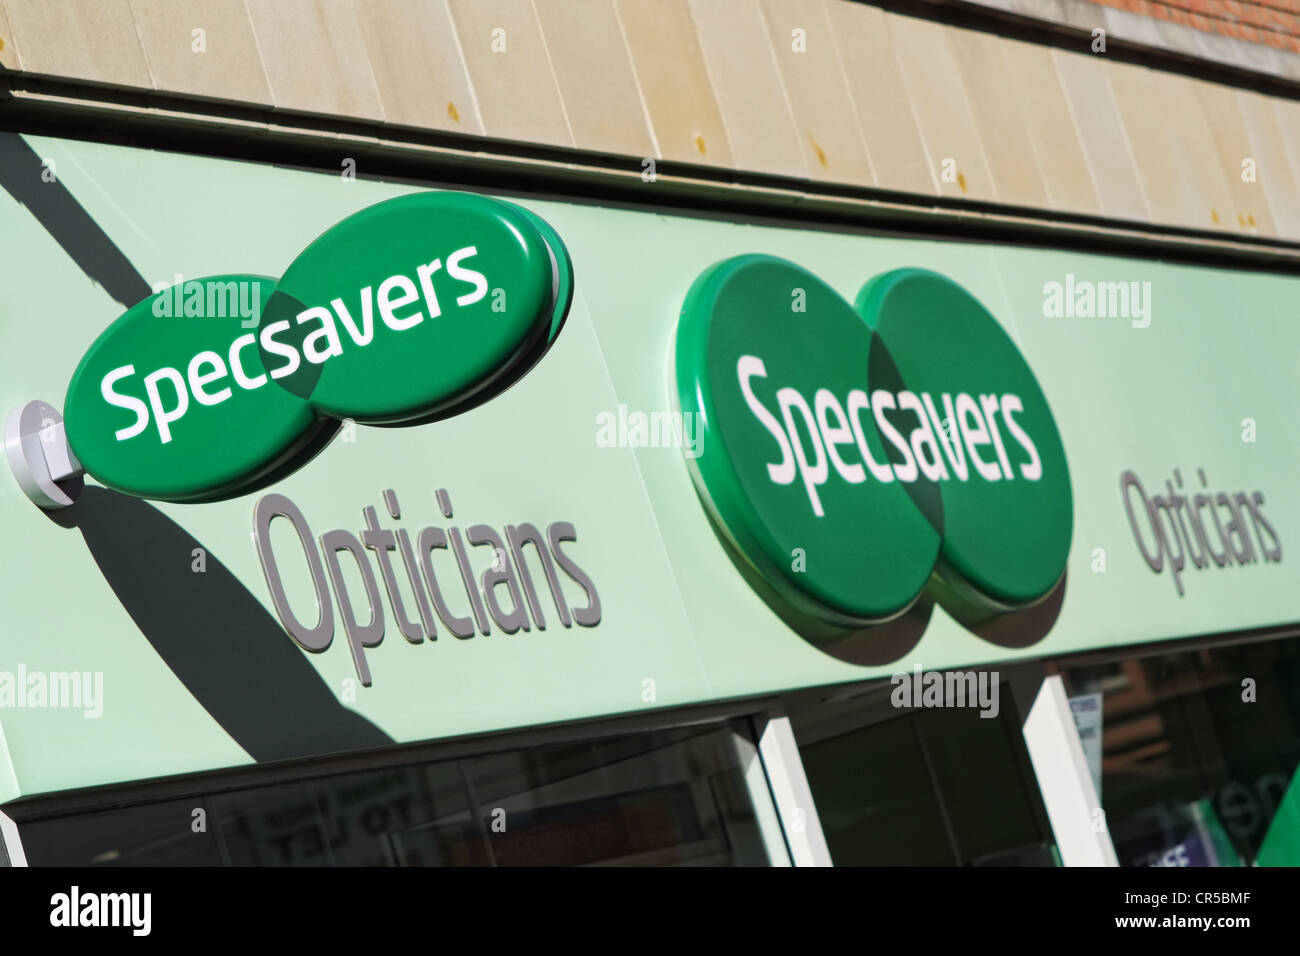 Specsavers sign outside a retail shop Stock Photo